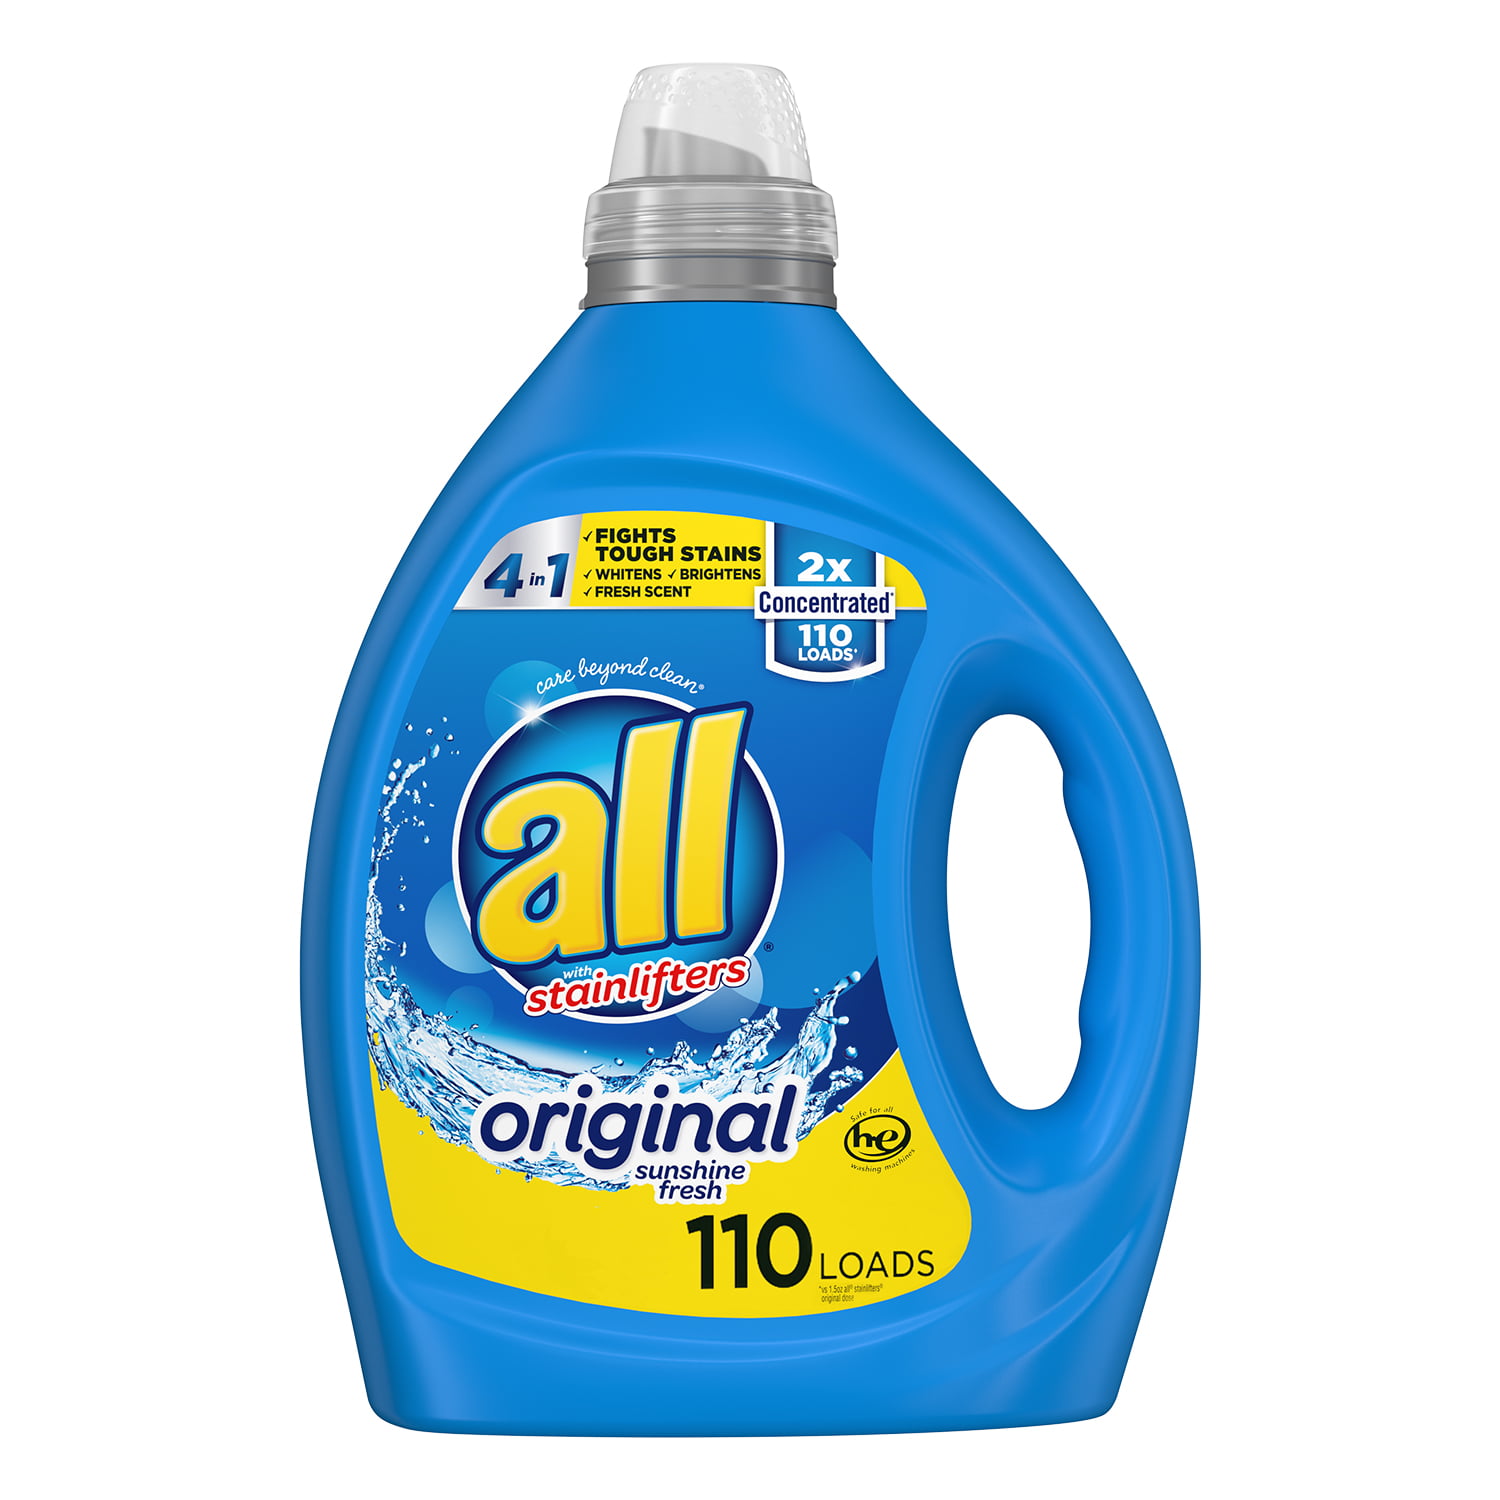 all Liquid Laundry Detergent, Free Clear for Sensitive Skin 